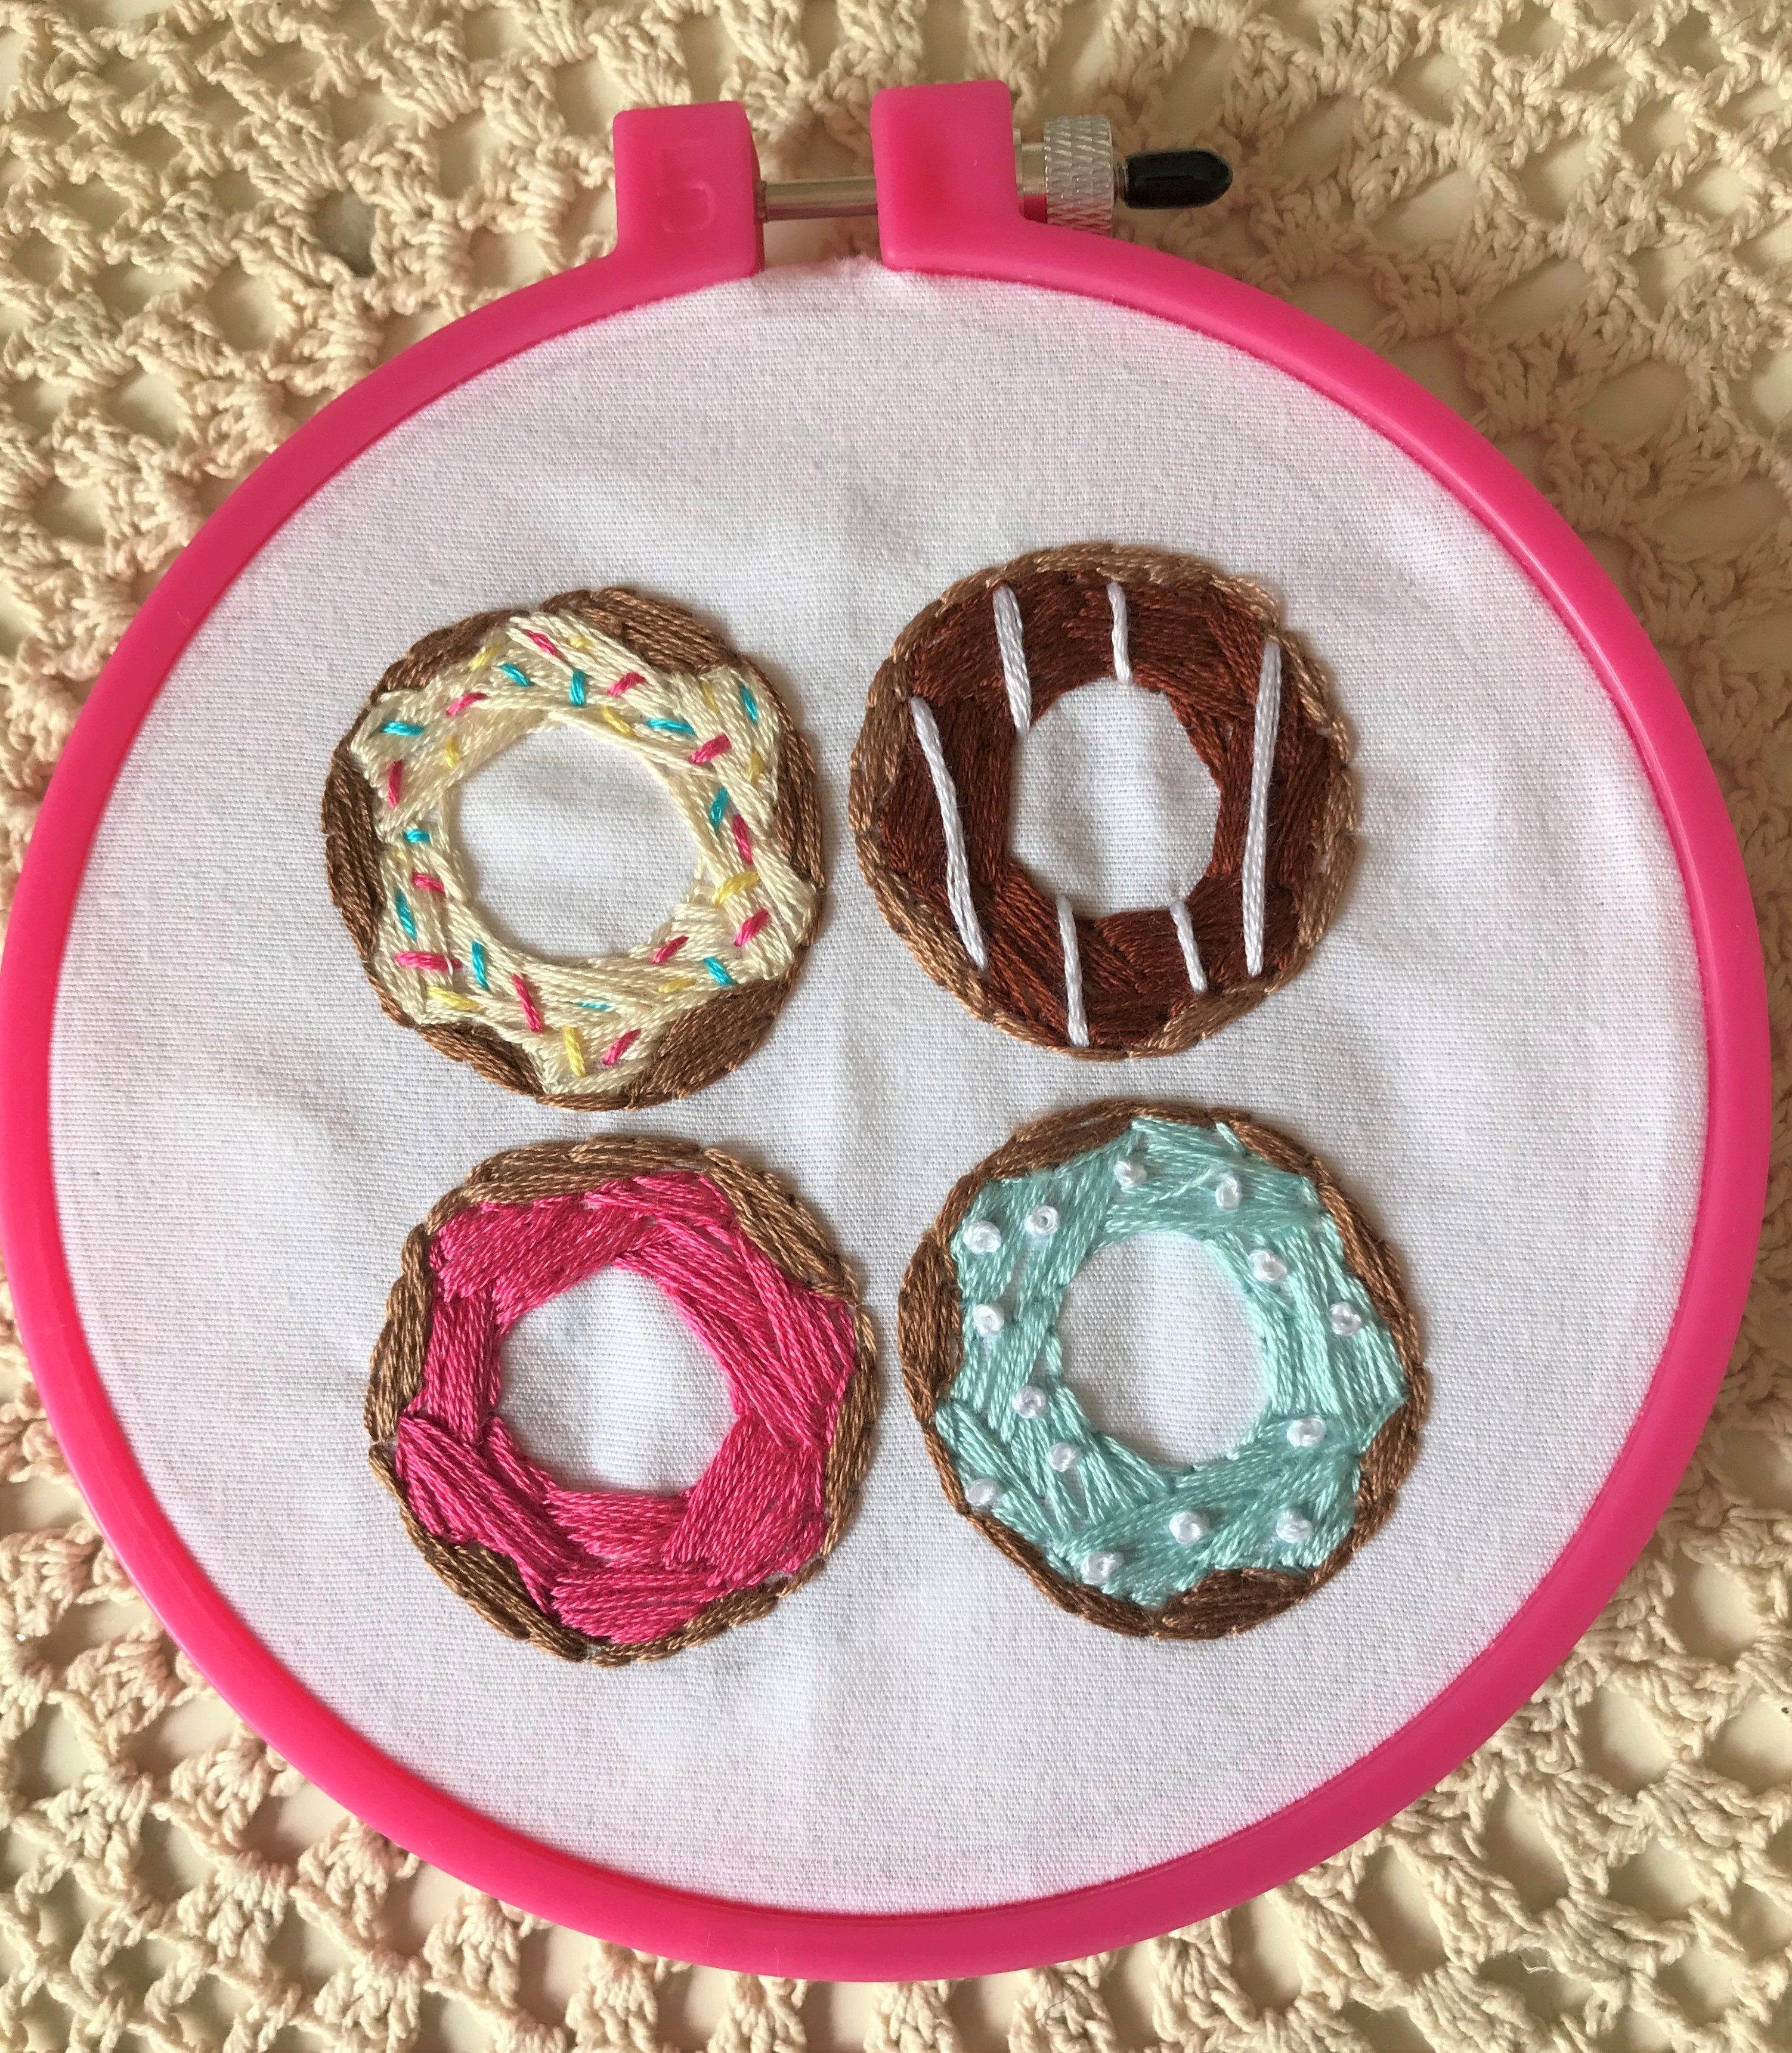 Embroidery Patterns Pdf Donut Embroidery Pattern Pdf Laura K Bray Designs